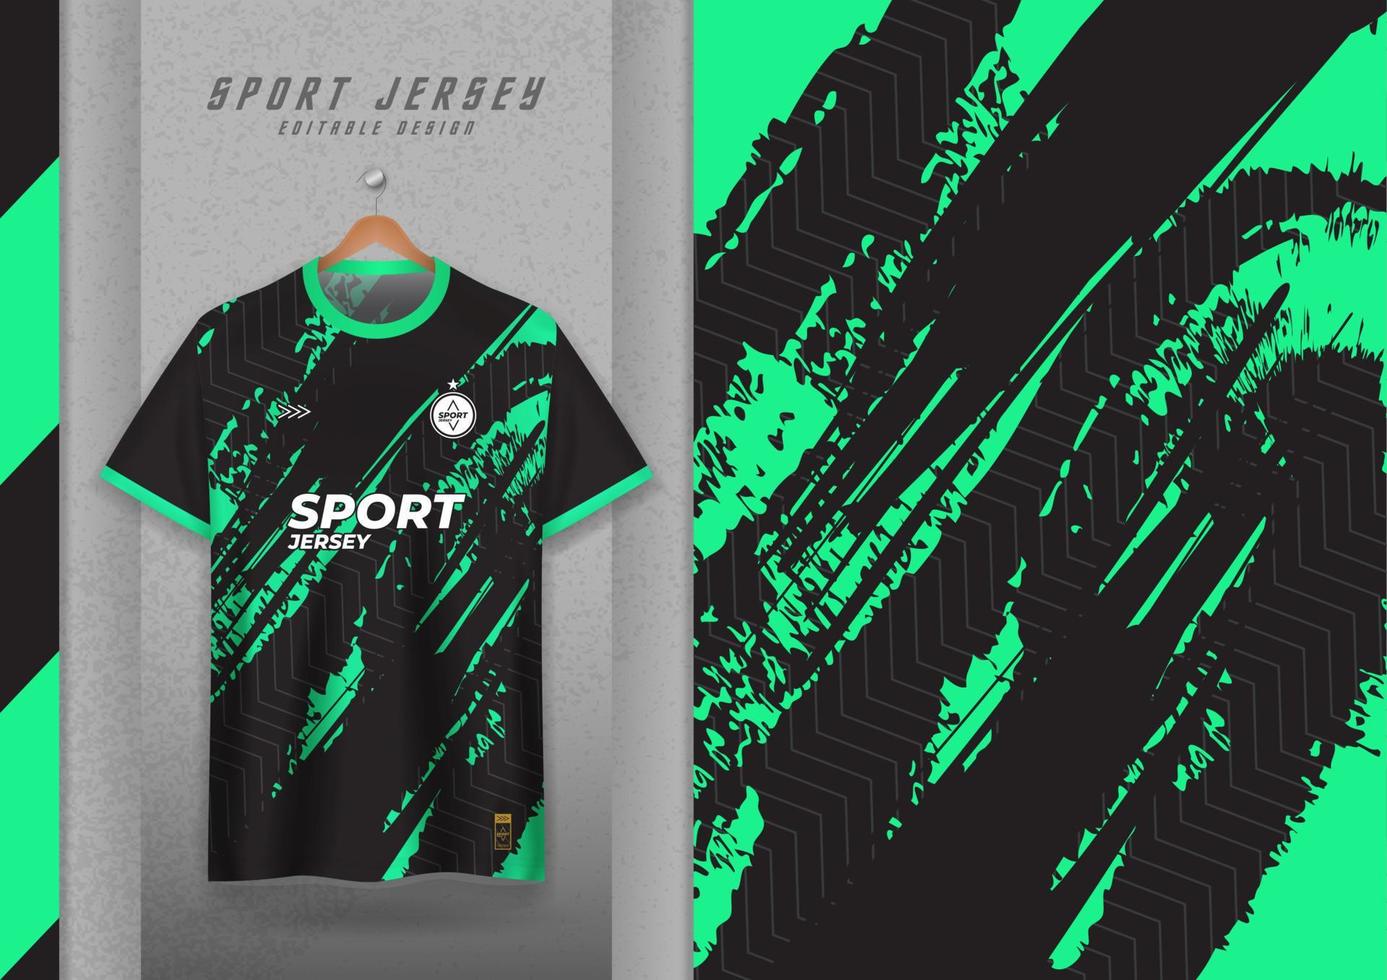 Fabric pattern design for sports t-shirts, soccer jerseys, running jerseys, jerseys, gym jerseys, green stripes. vector